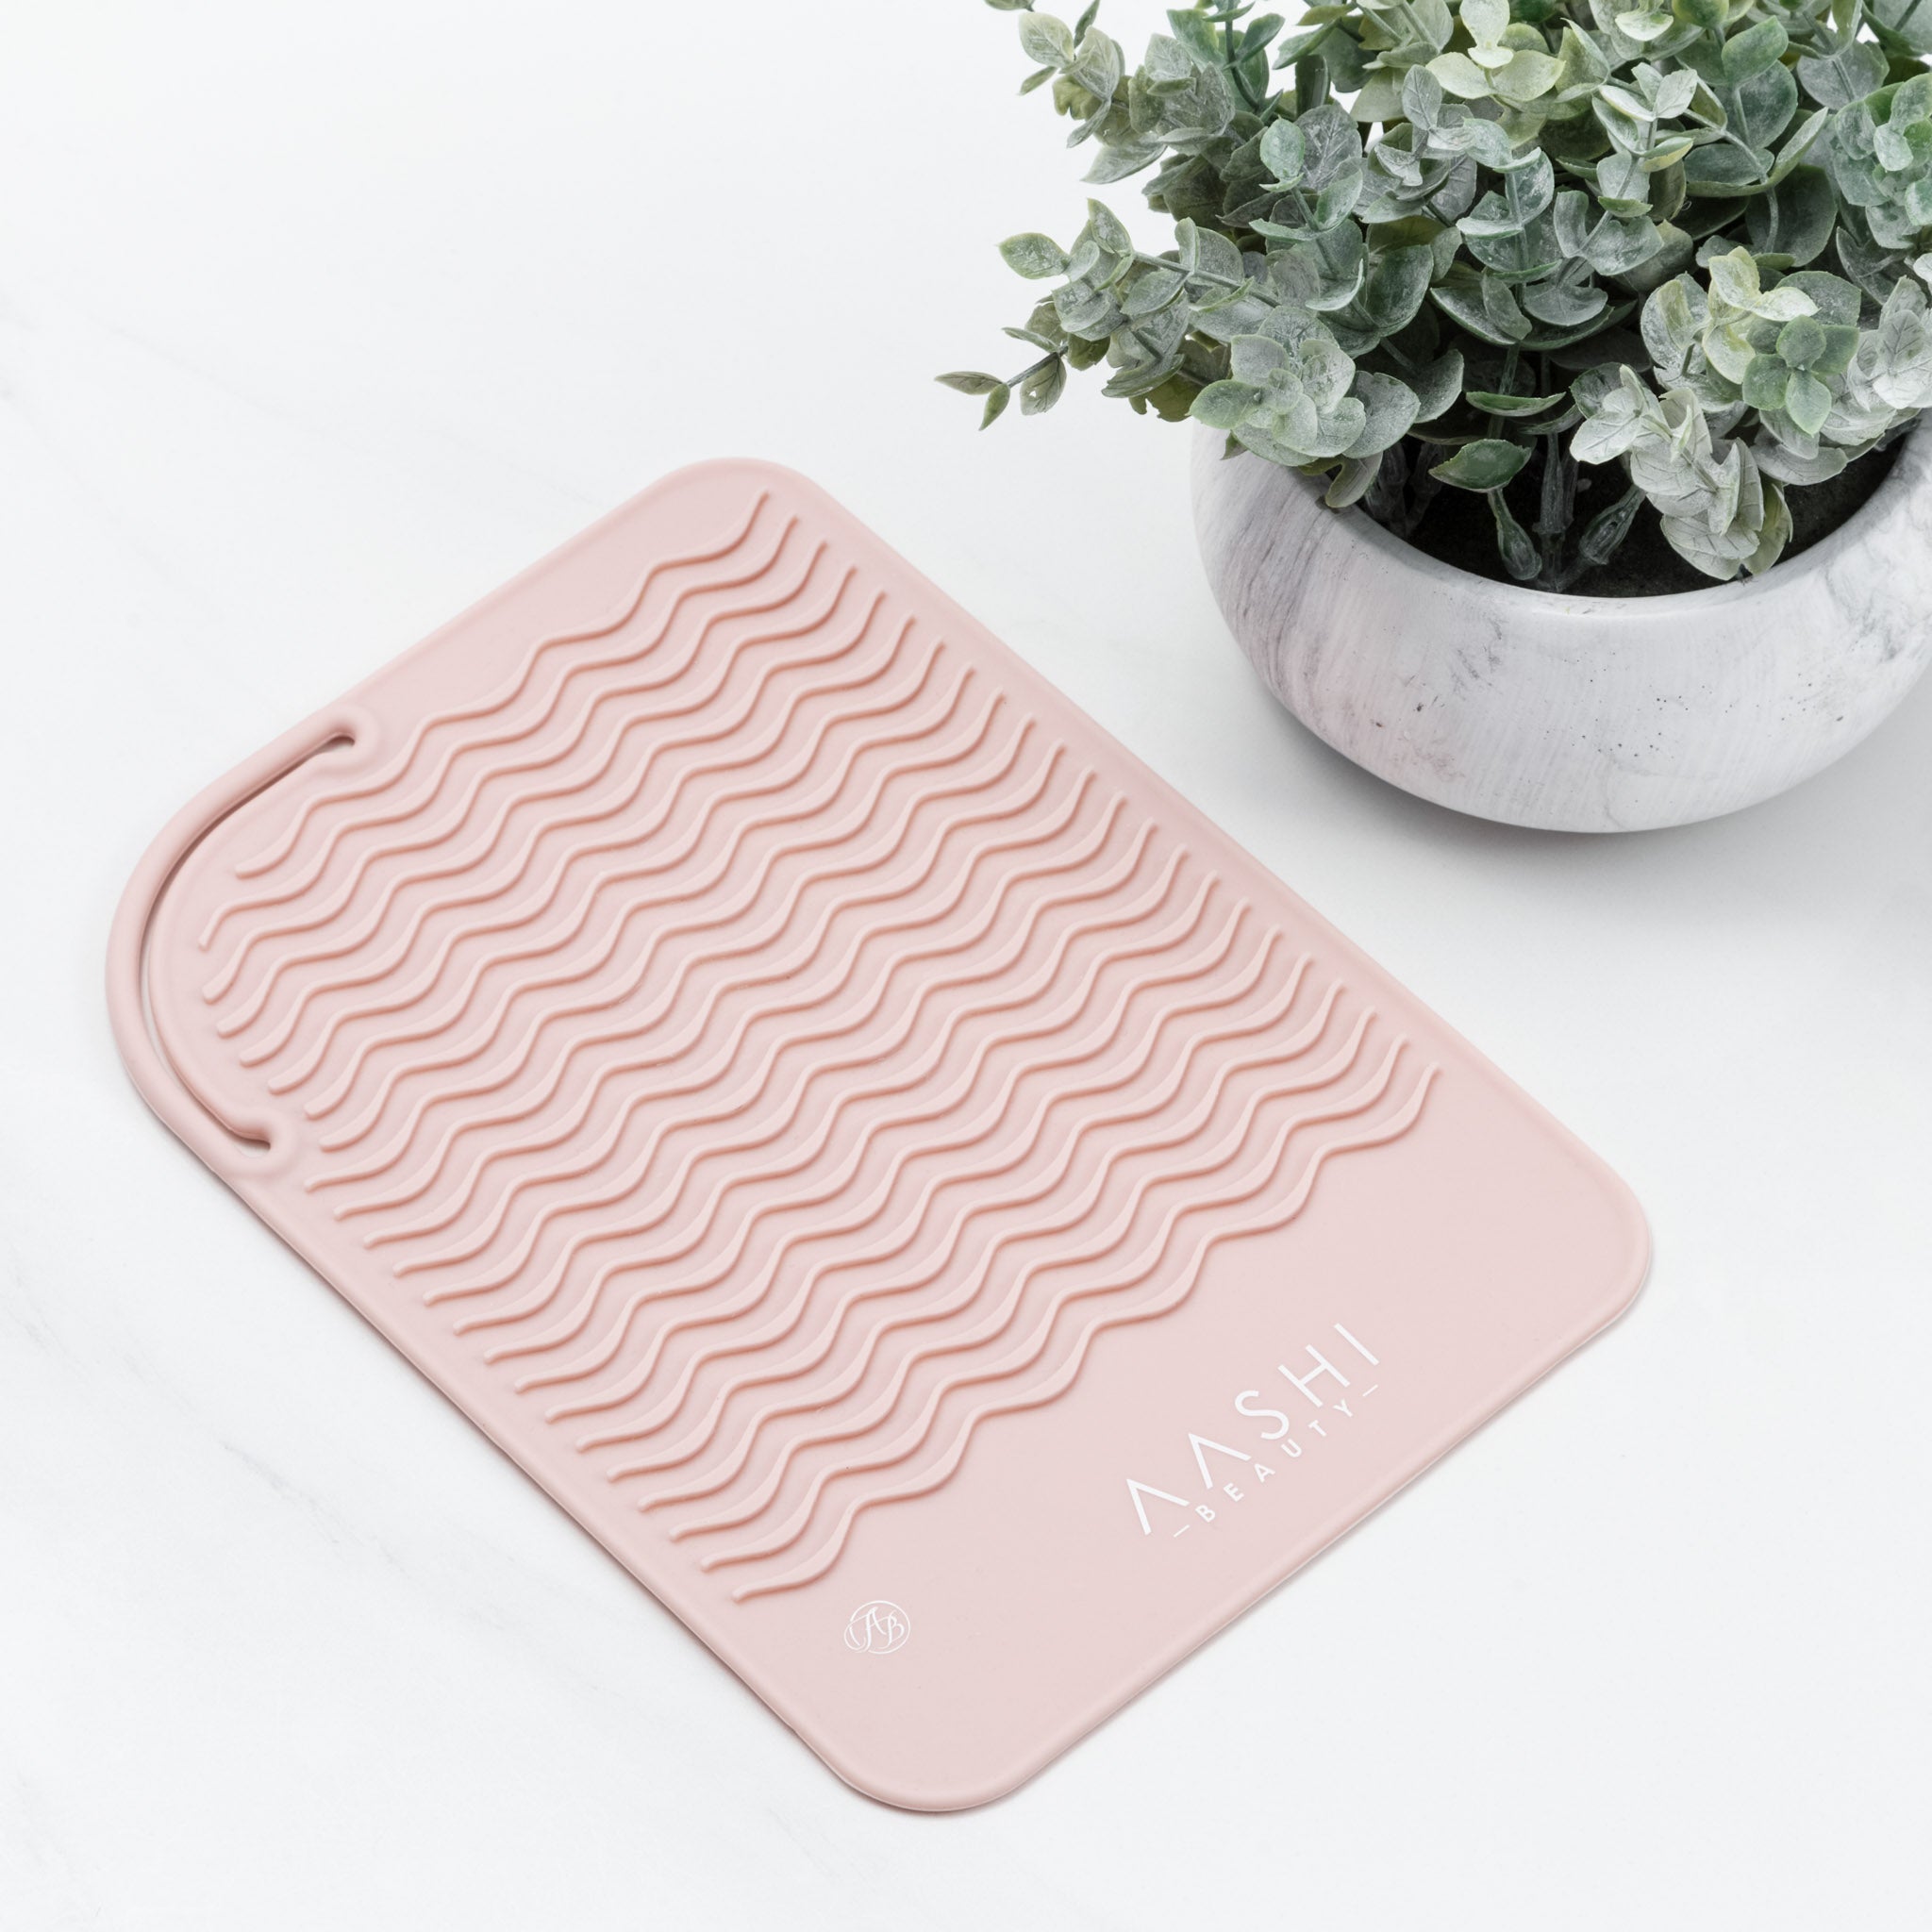 Colortrak Heat-Resistant Styling Station Mat, Silicone Mat Prevents Work  Surfaces from Heat Damage of Styling Tools, Prevent Tool from Falling or